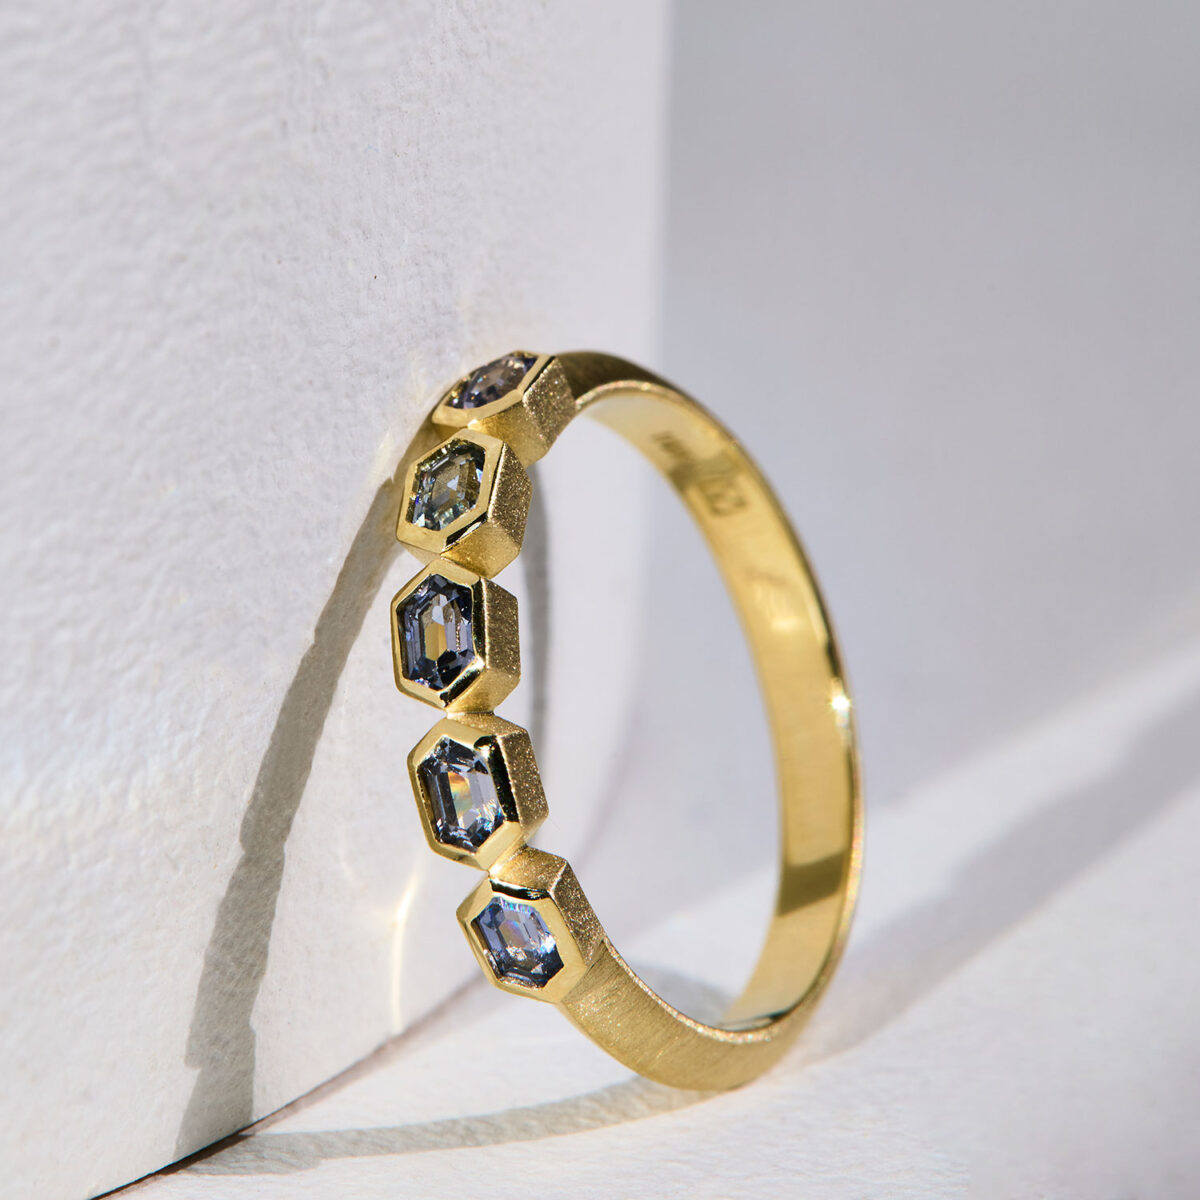 18 karat Yellow Gold and Spinel Hexagon Ring